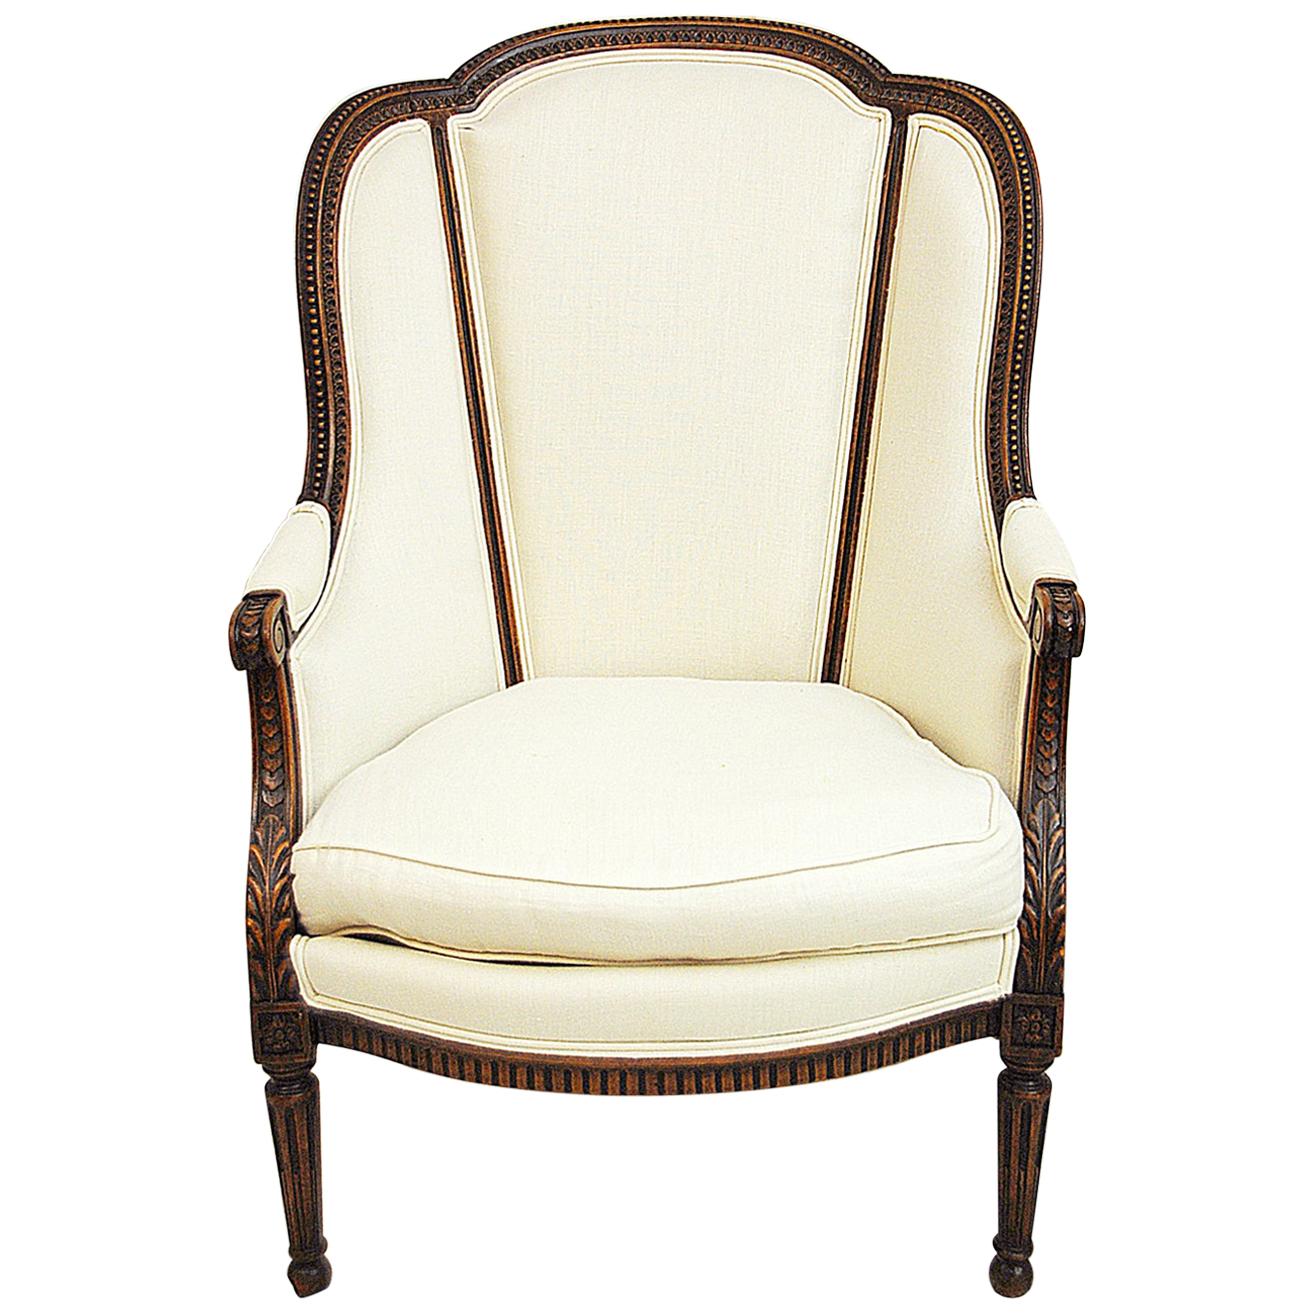 French Louis XVI Style Carved Beechwood Bergère Chair in Cream Colored Linen